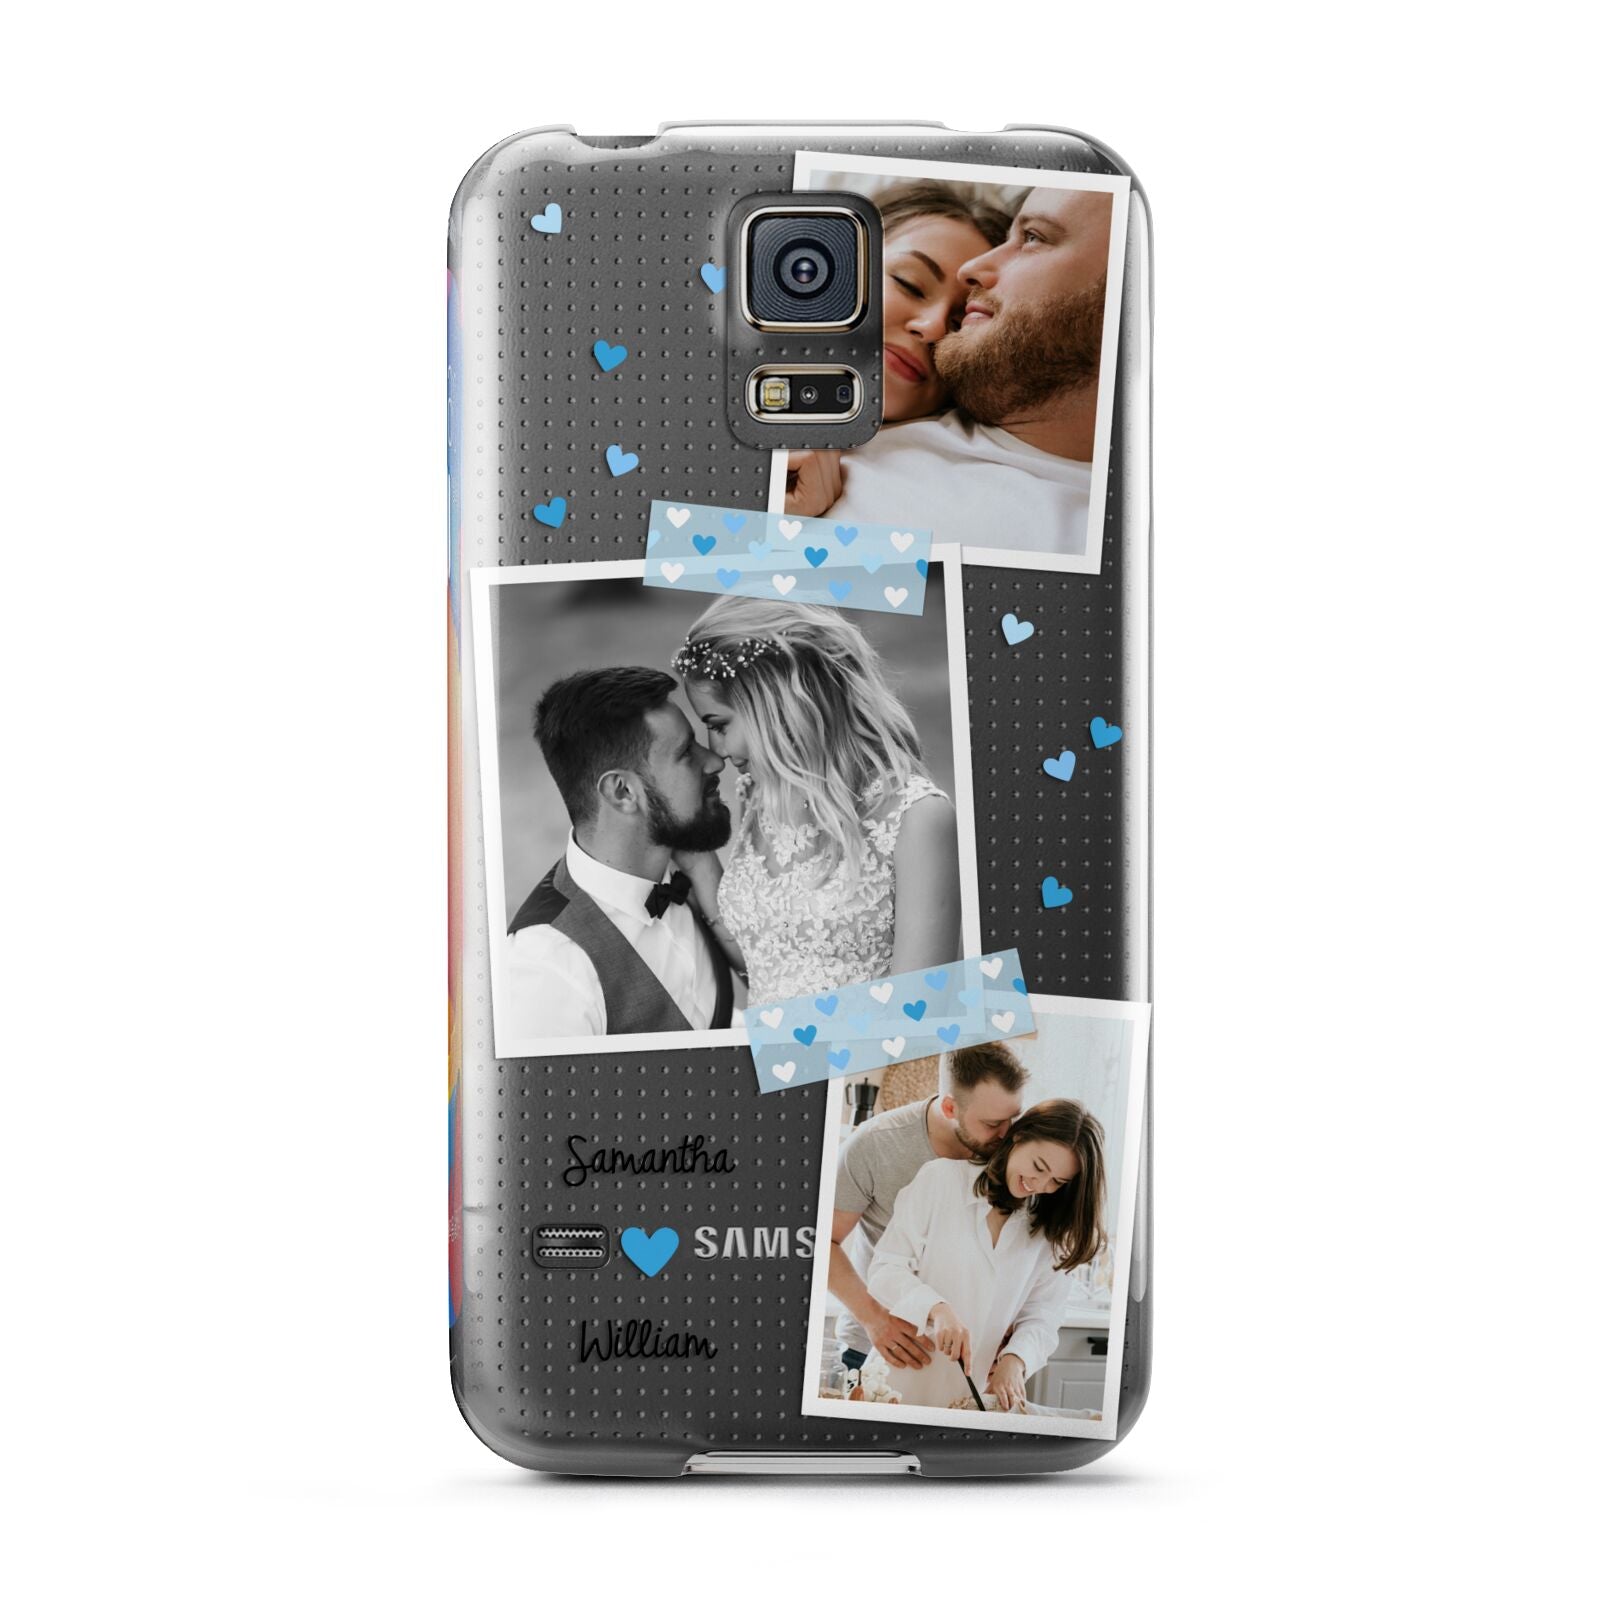 Wedding Snaps Collage with Blue Hearts and Name Samsung Galaxy S5 Case